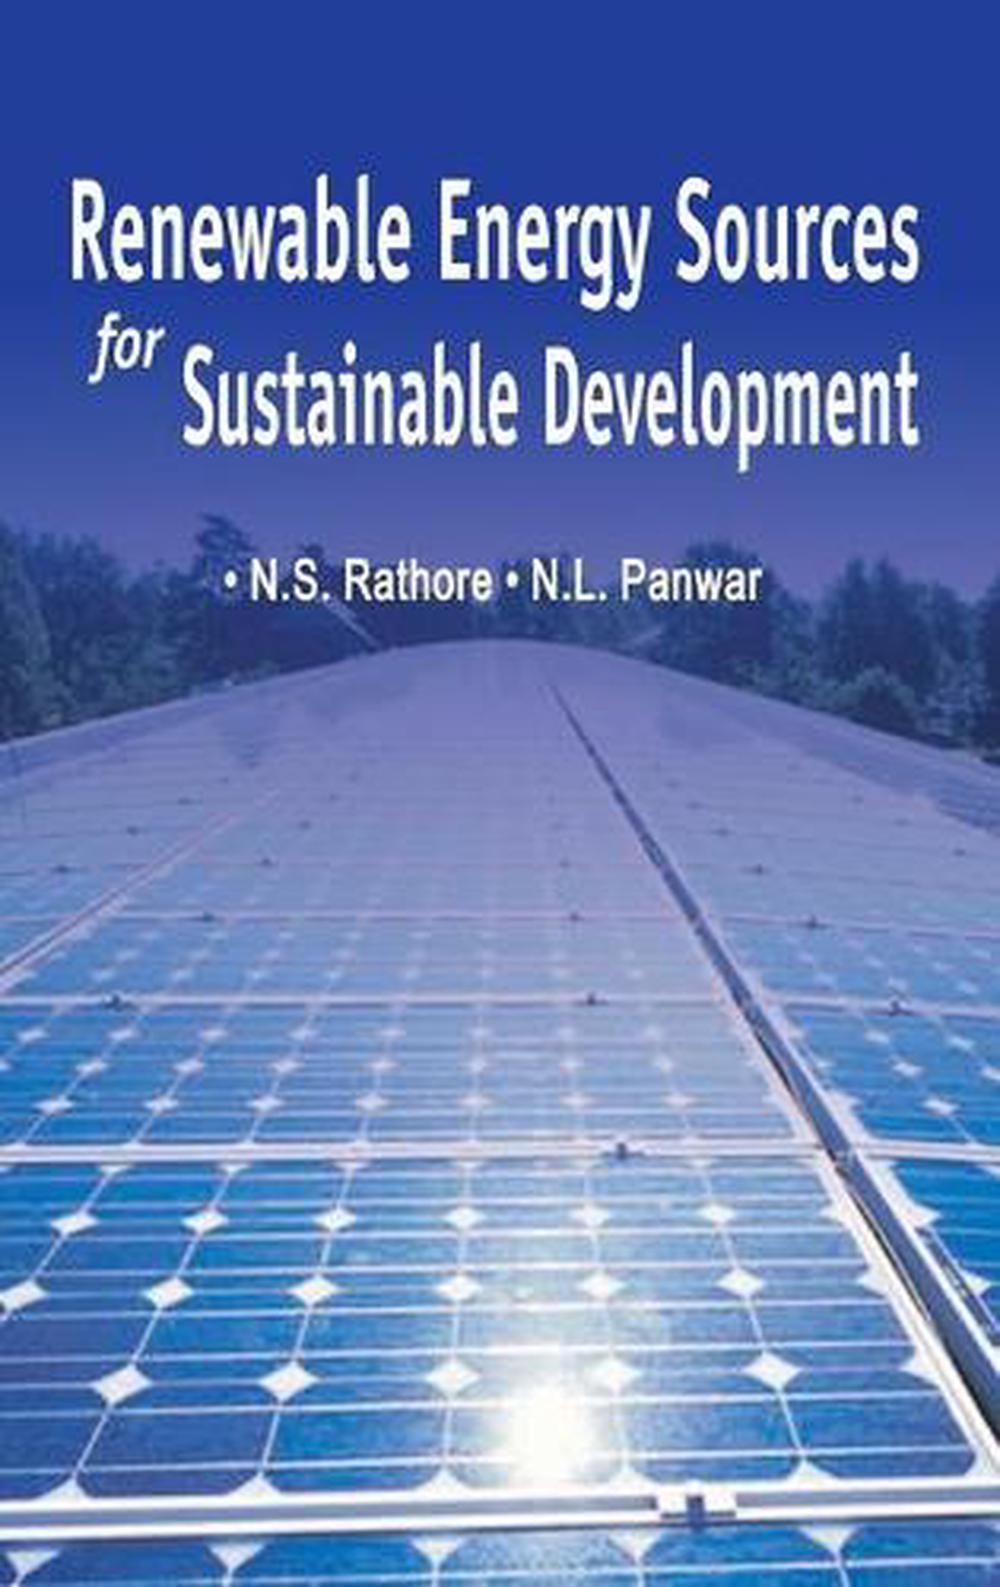 literature review of renewable energy